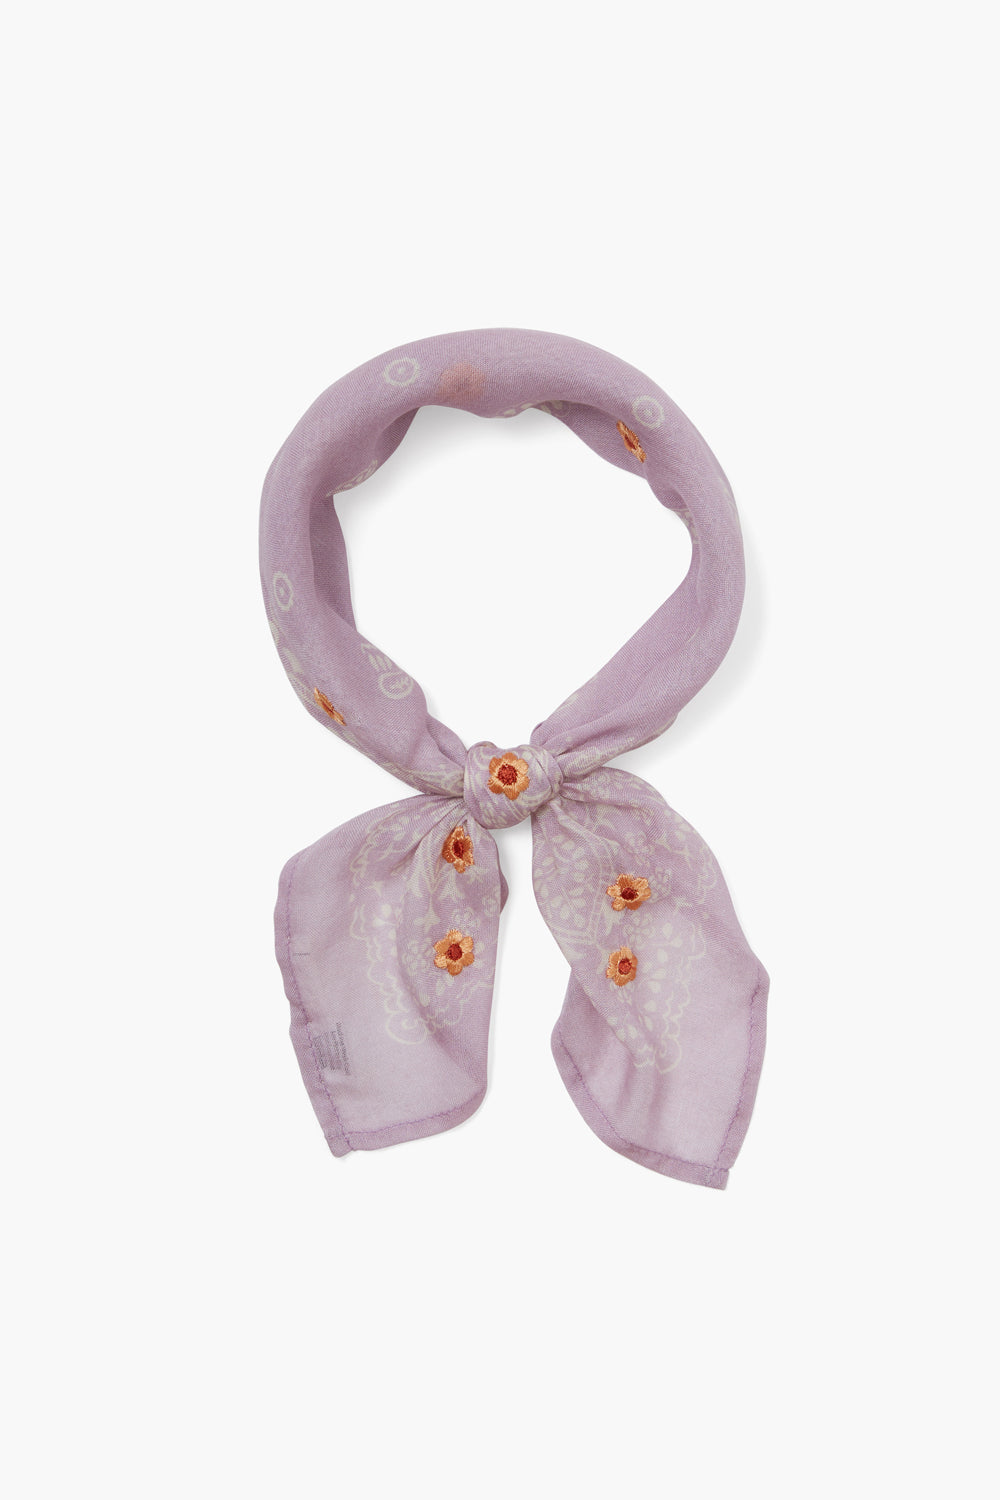 PAISLEY GARDEN EMBROIDERED NECKERCHIEF -WINSOME ORCHID